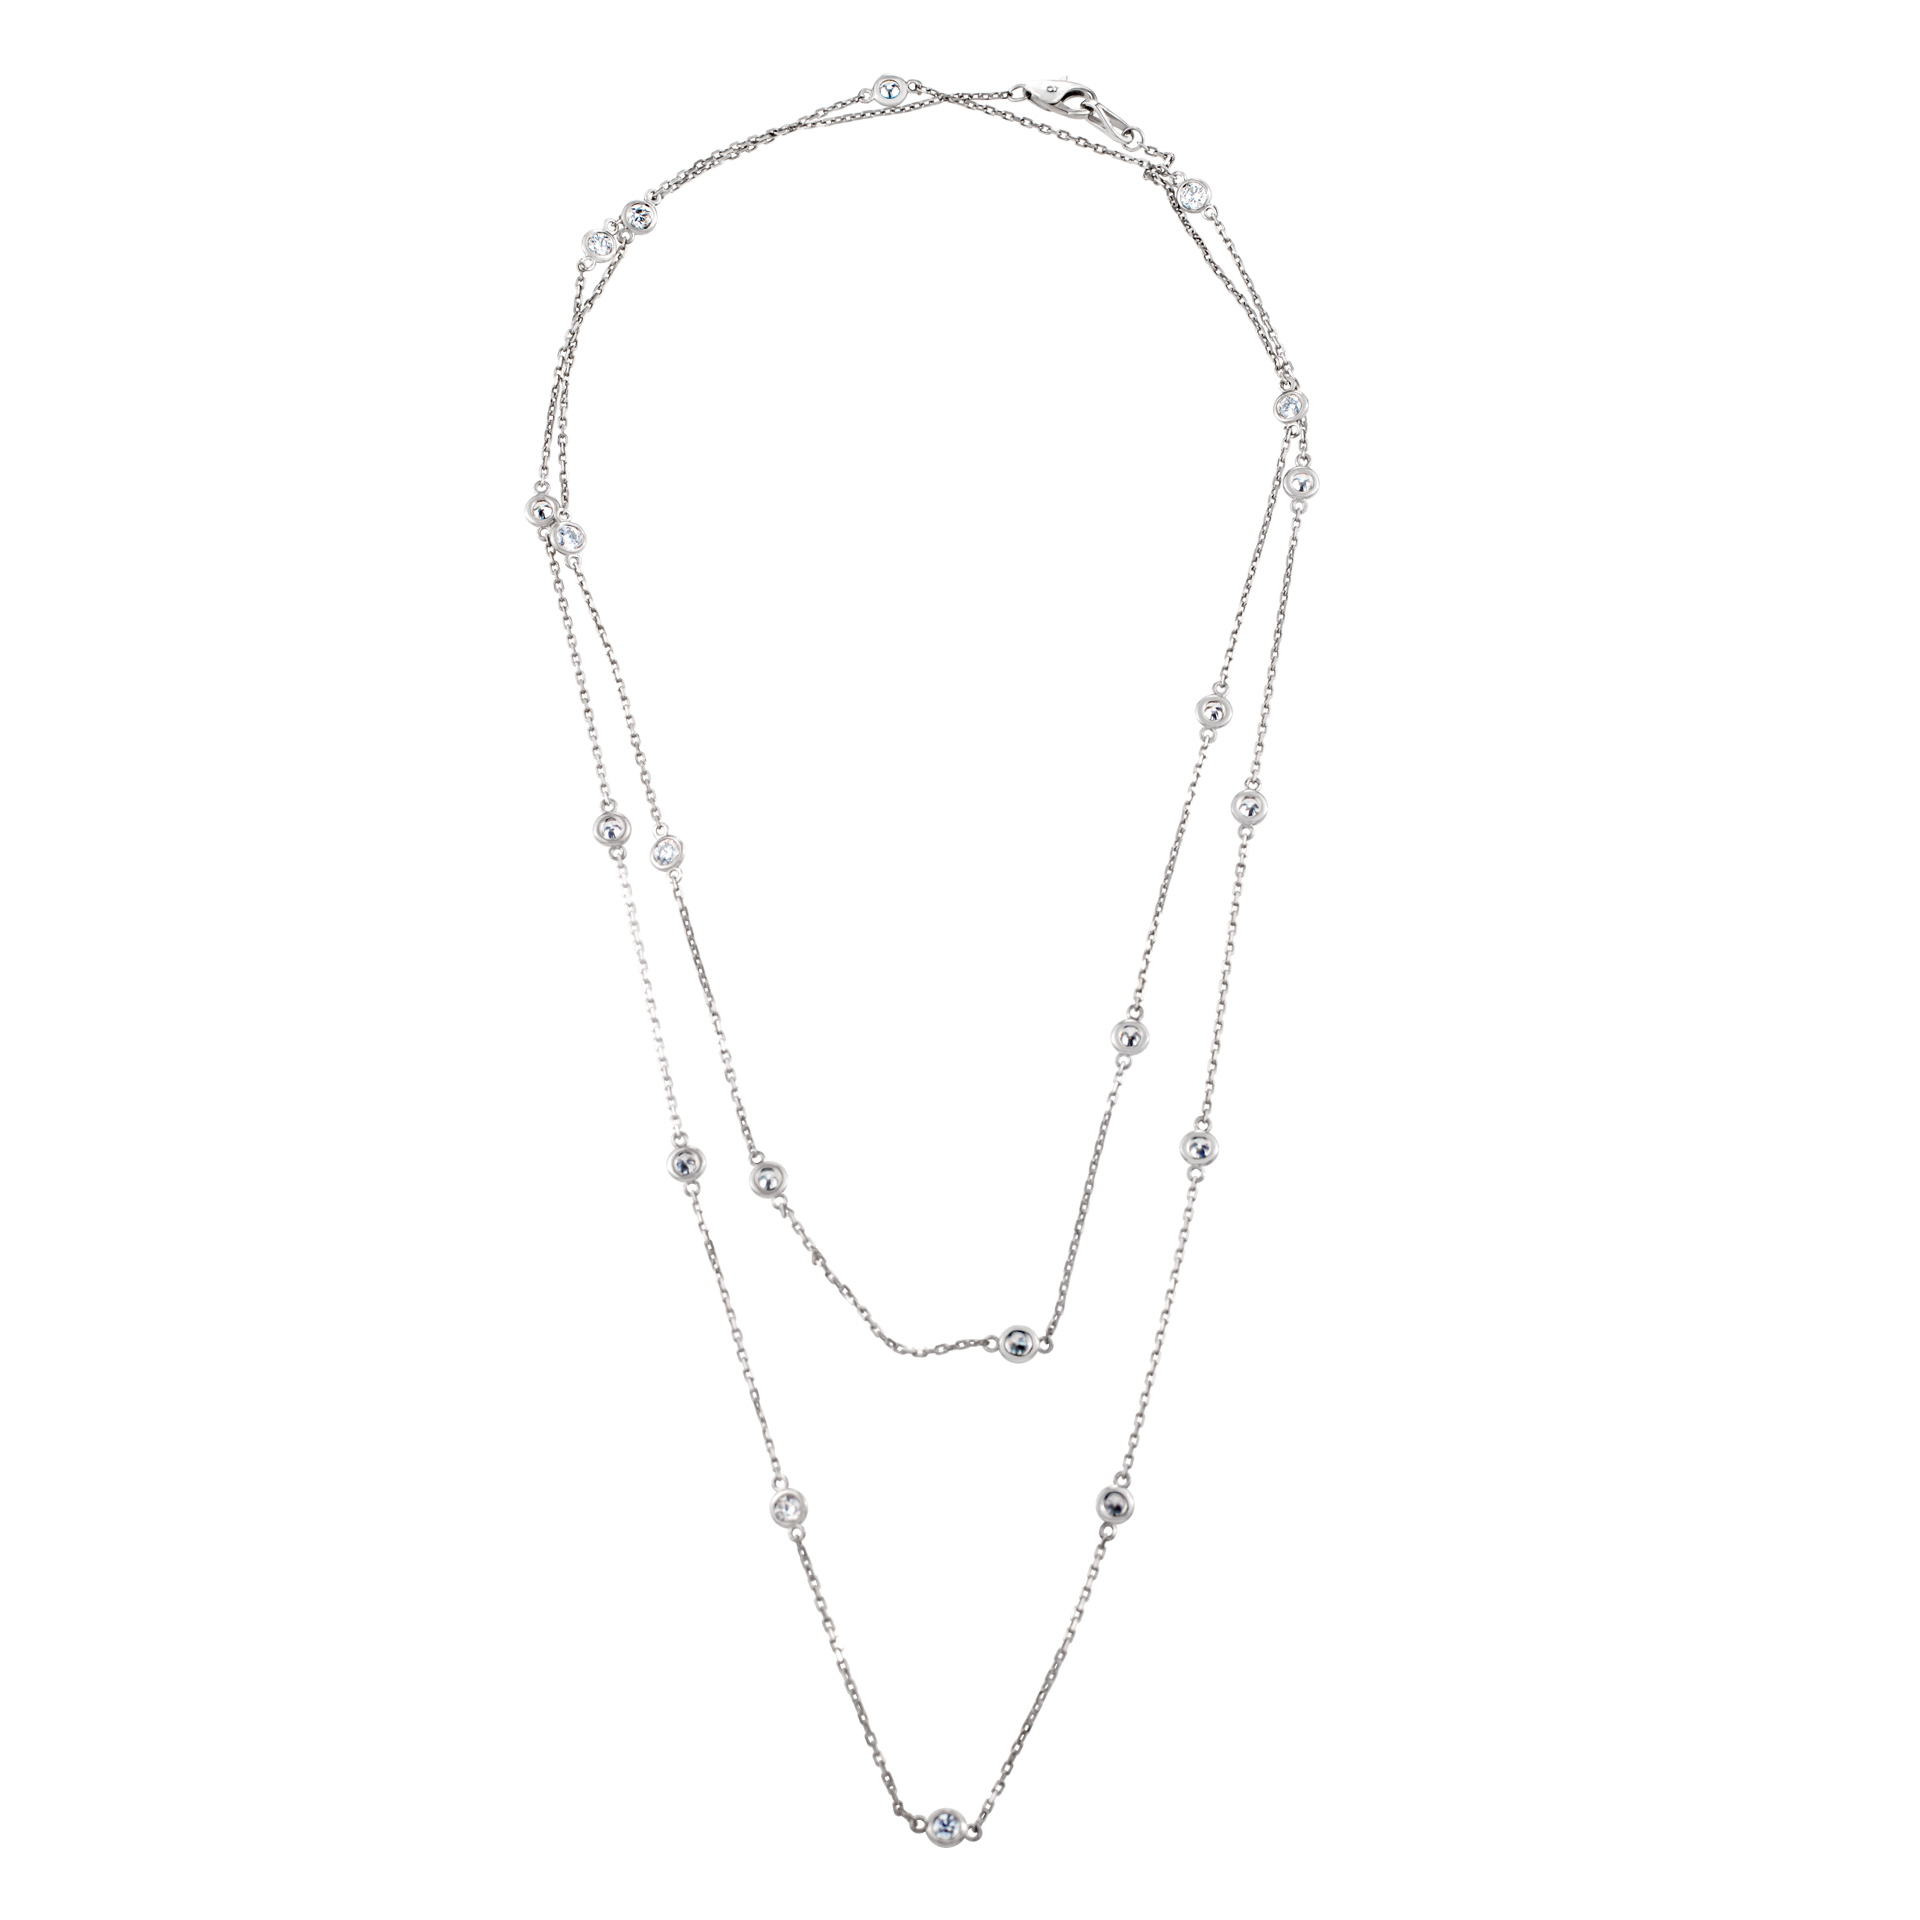 Diamonds by the yard 14K white gold necklace